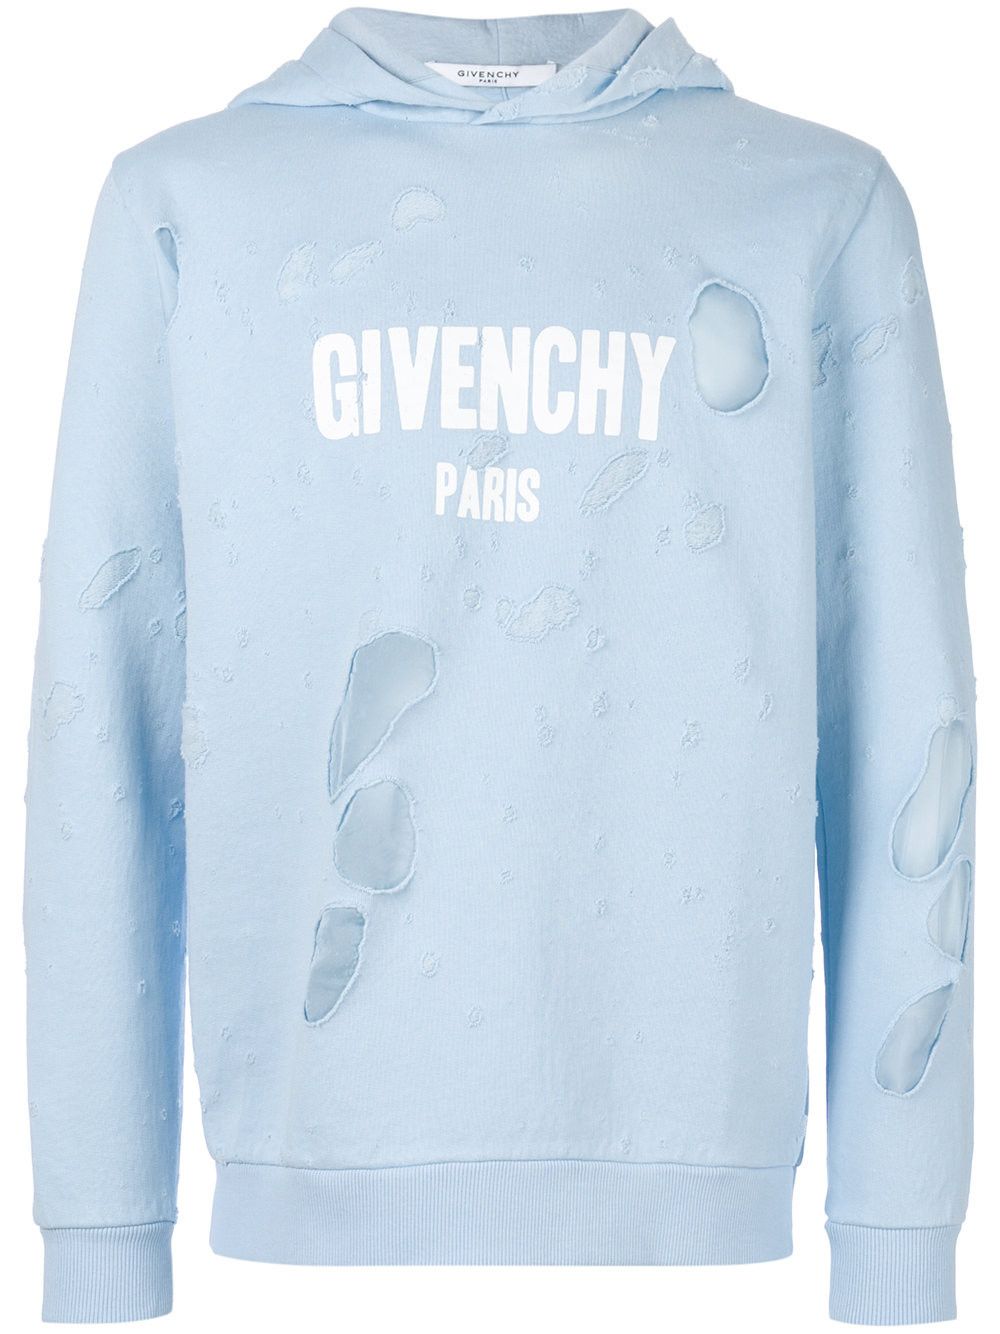 Givenchy $1500 Givenchy Baby Blue Destroyed Distressed Logo Rottweiler Shark Hoodie size M Size US M / EU 48-50 / 2 - 2 Preview